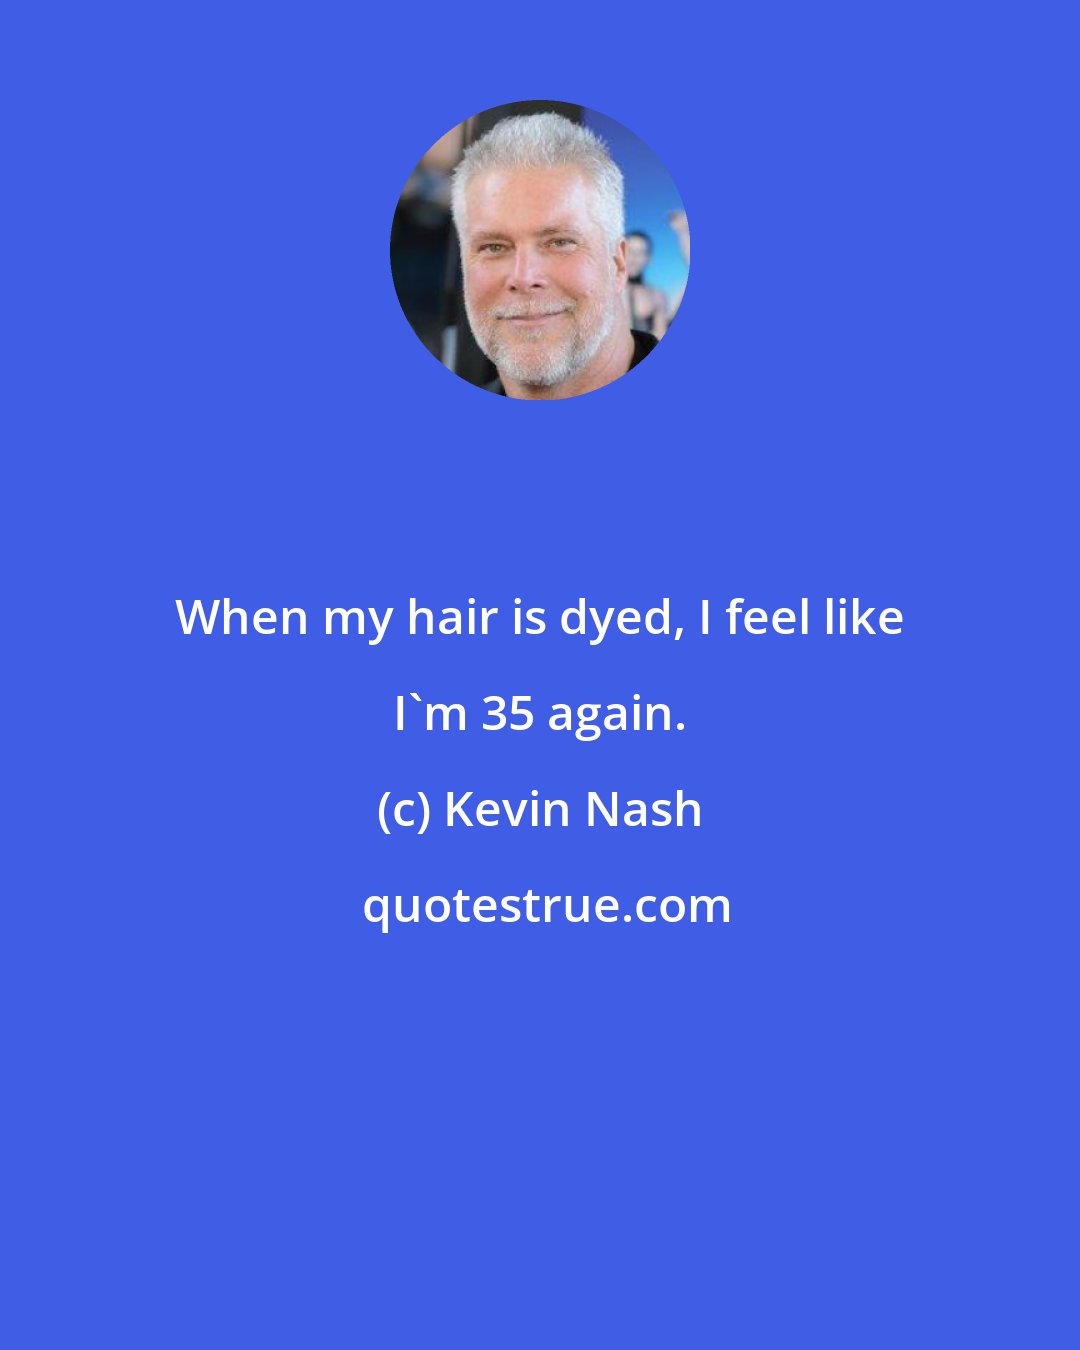 Kevin Nash: When my hair is dyed, I feel like I'm 35 again.